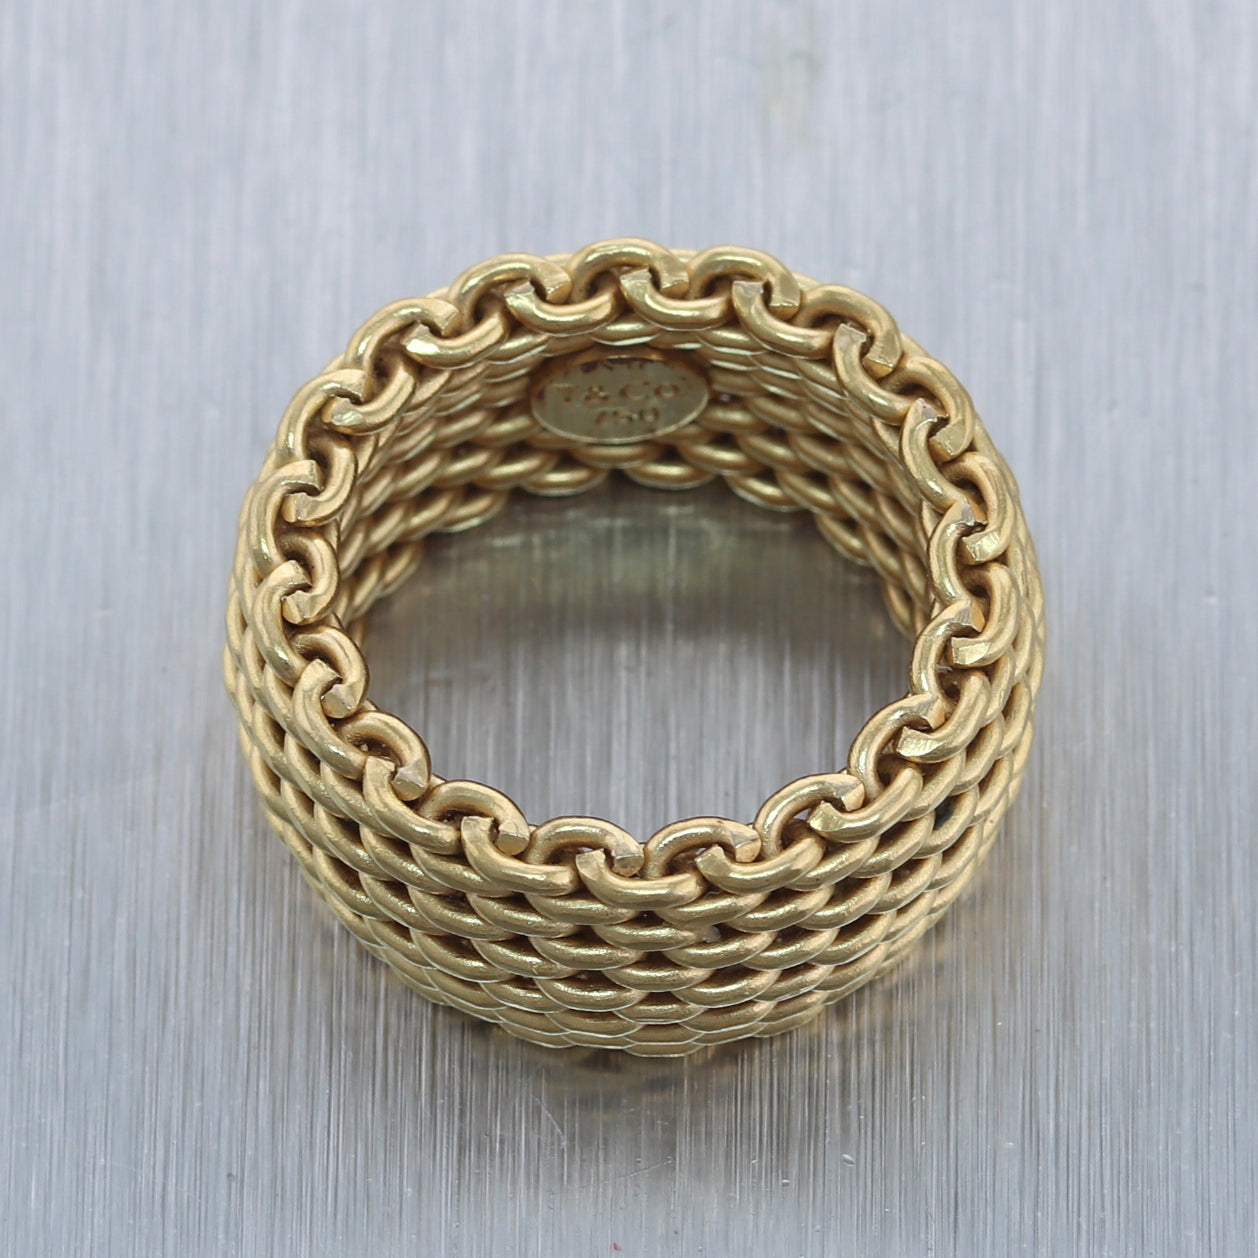 Sold at Auction: TIFFANY & CO EIGHTEEN KARAT GOLD MESH RING